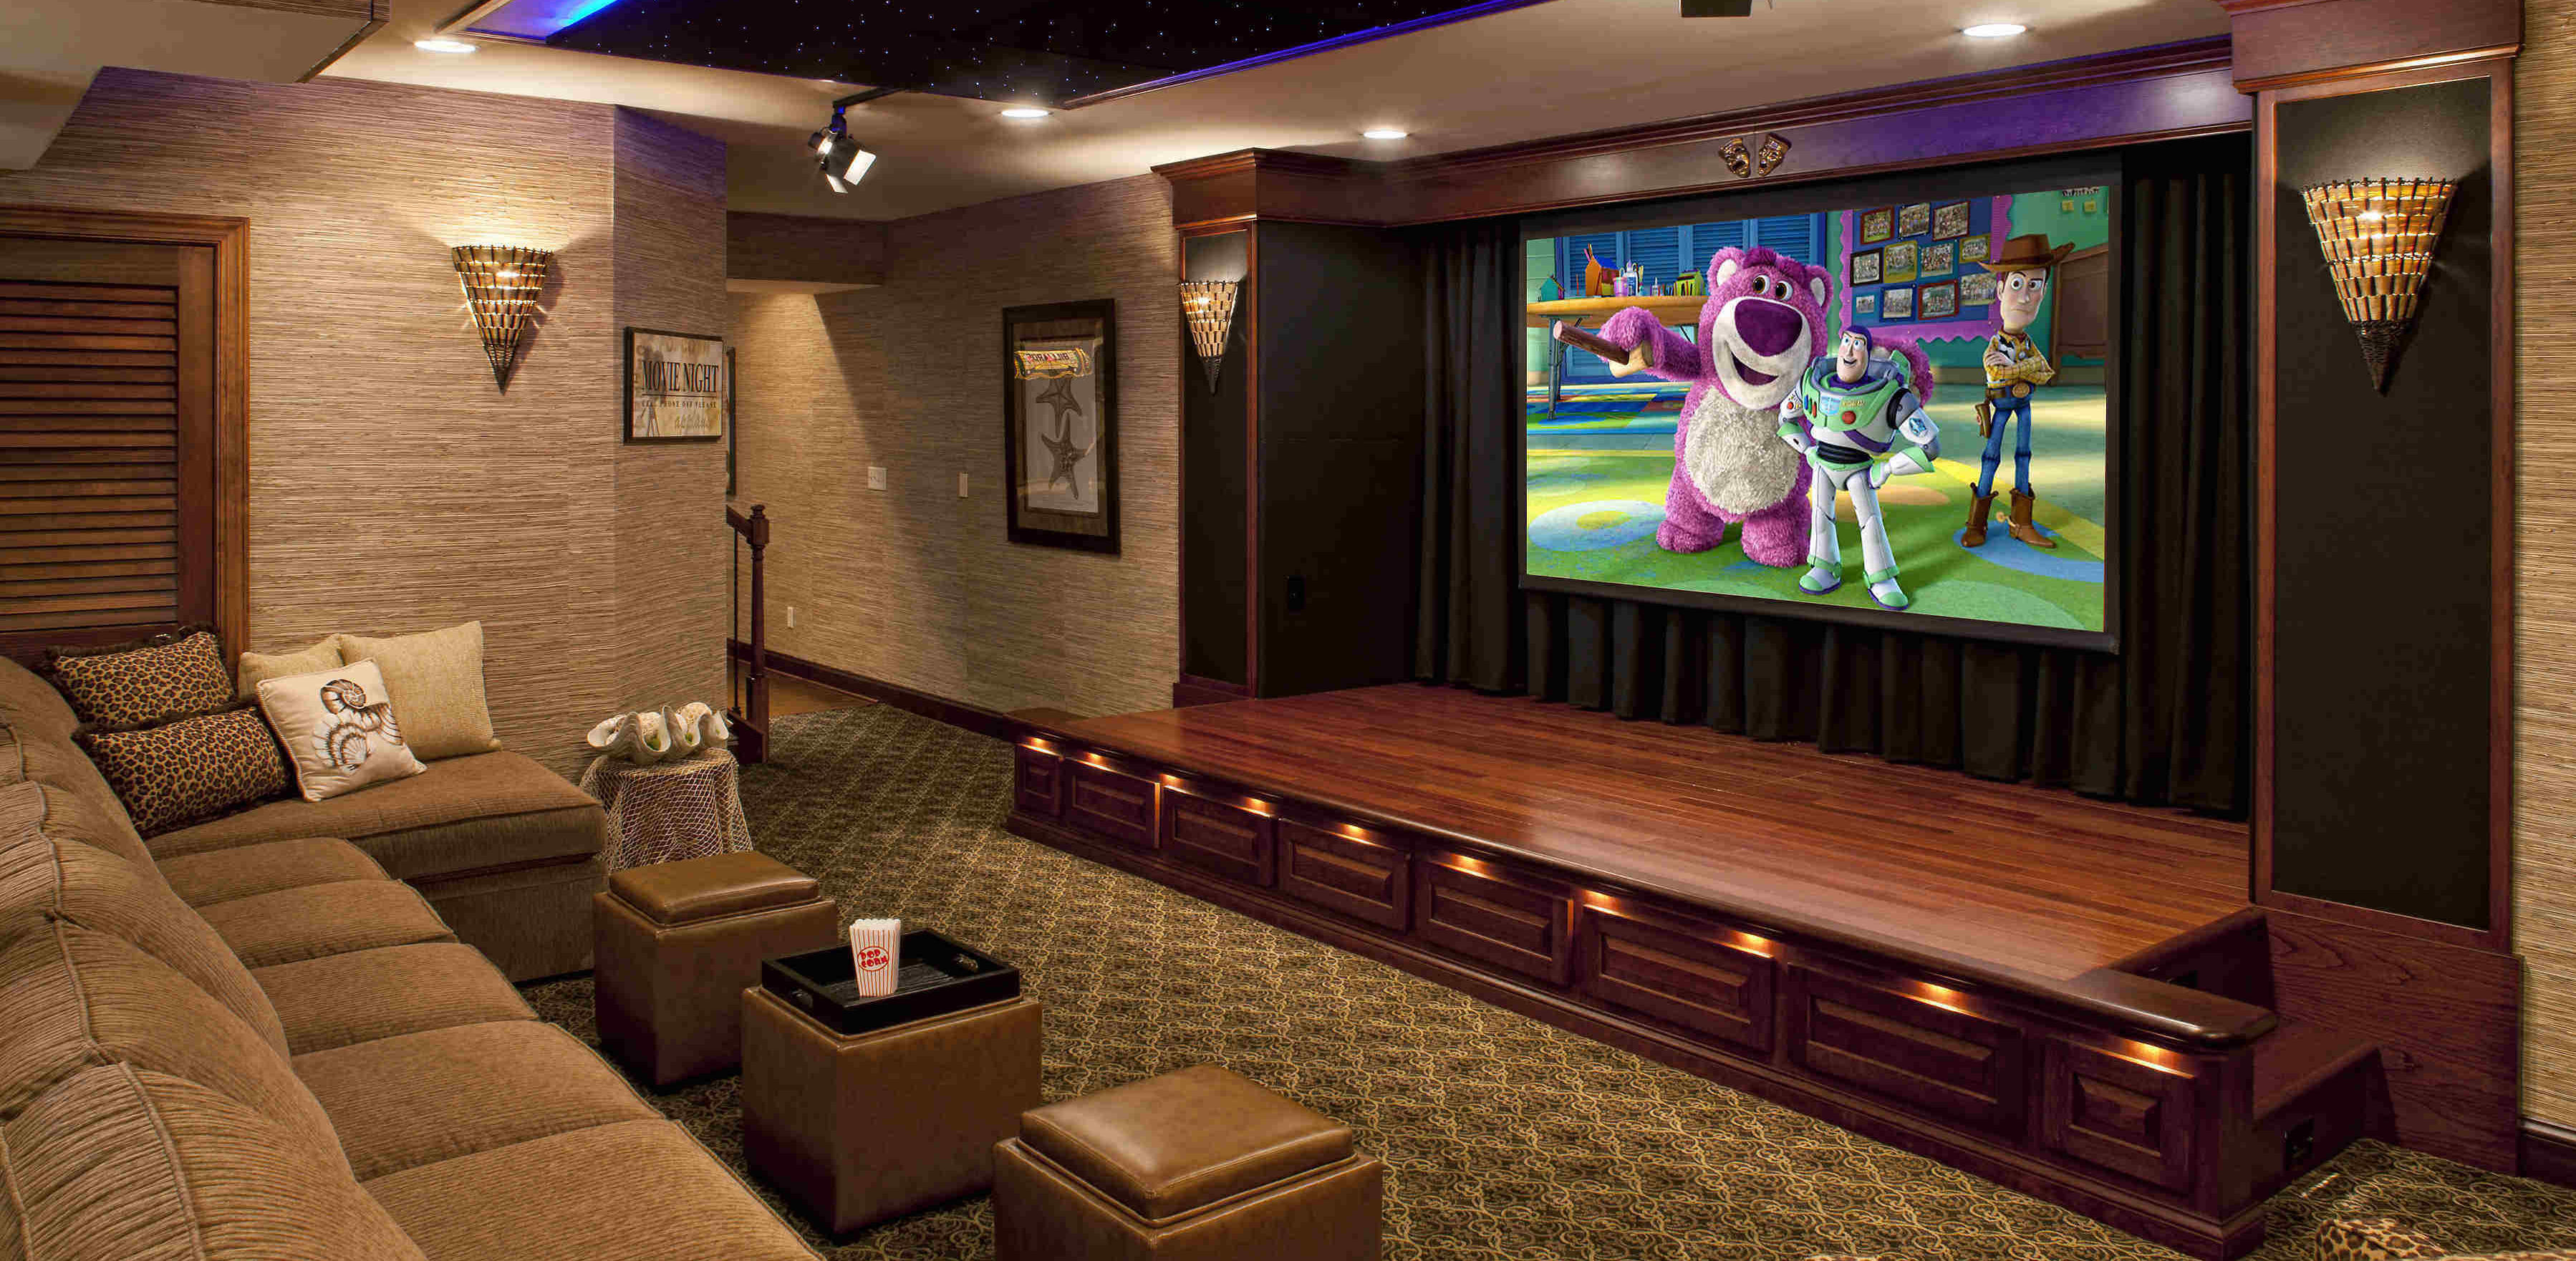 Home Theater Decorations Cheap : Cheap Home Decor Stores - Best Sites, Retailers - Diy home theater decorations ideas basement home theater rooms red home theater seating small home theater speakers luxury home theater couch design cozy home theater projector setup modern home theater lighting system #hometheaterdecor.